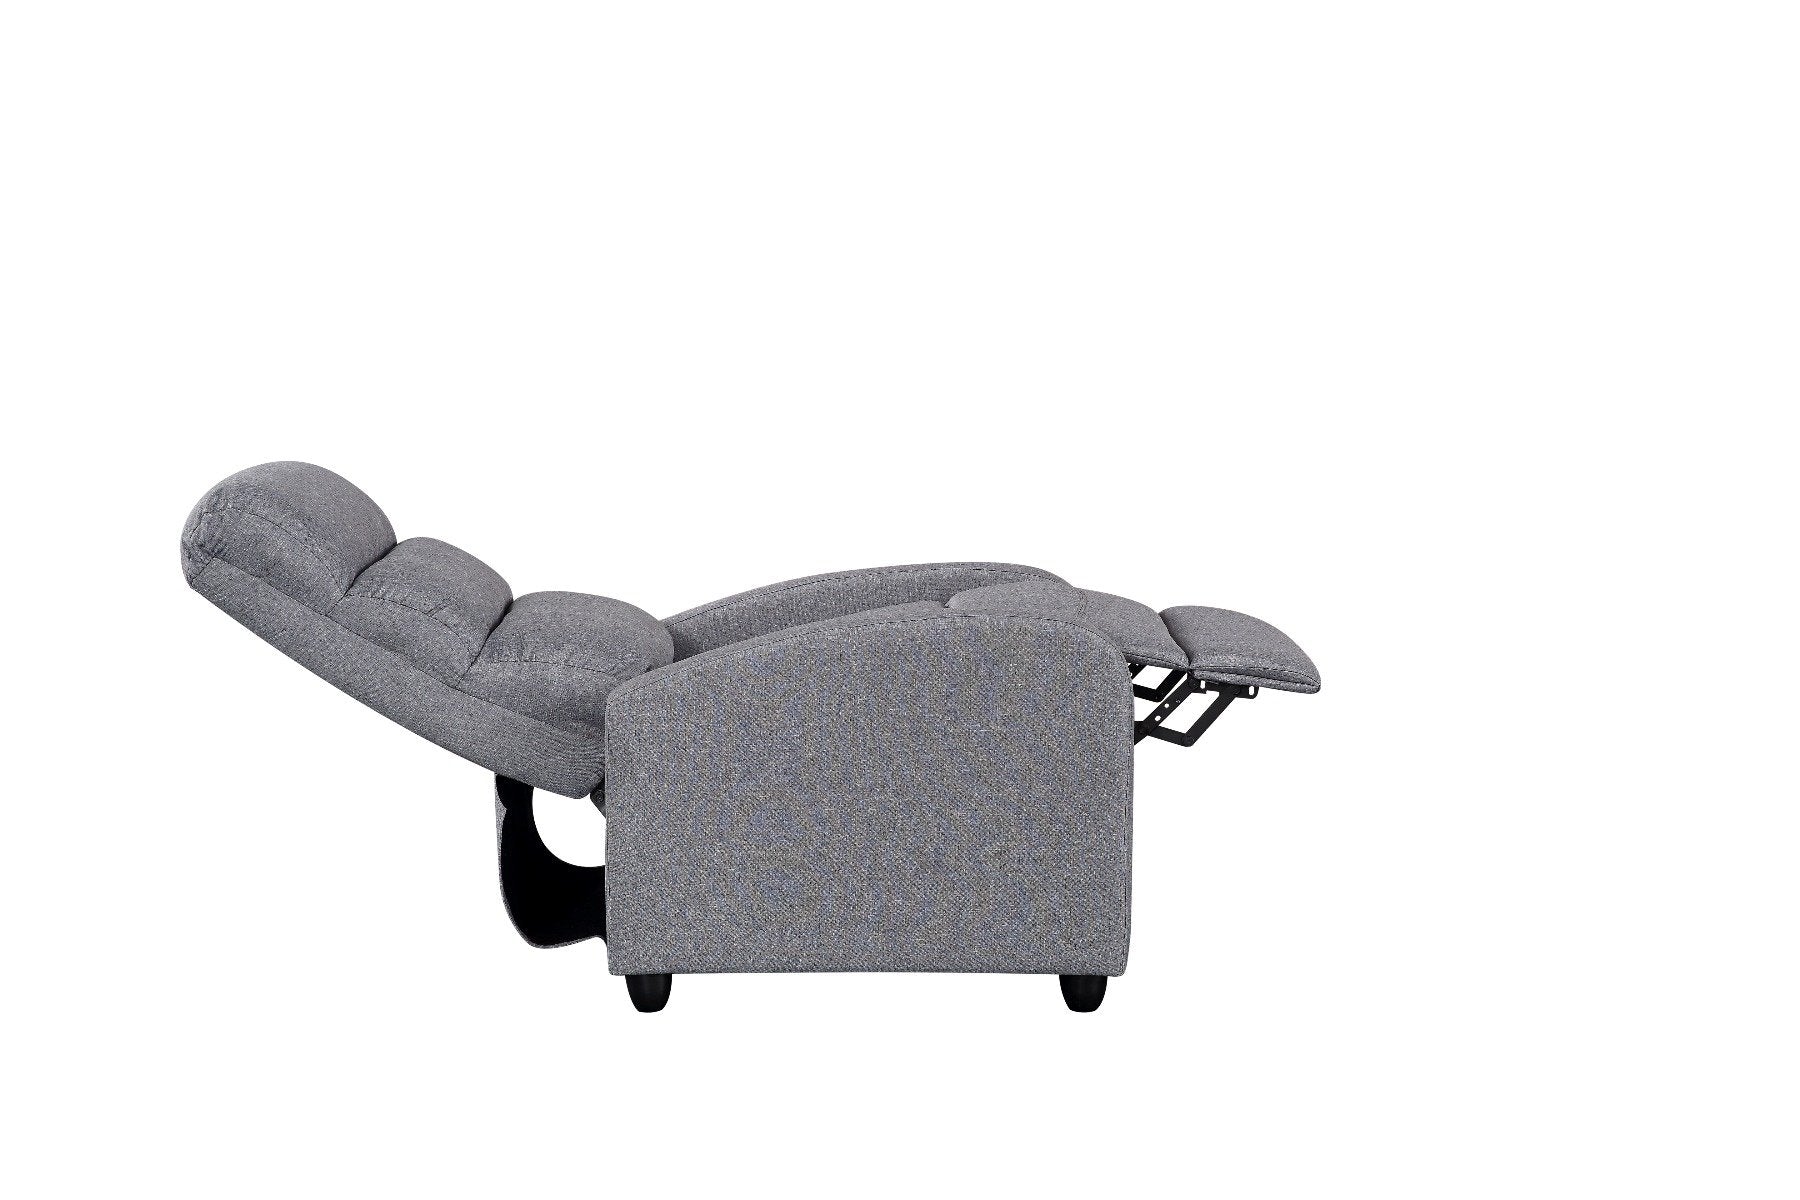 Bar Stools & Chairs Luxury Fabric Recliner Chair - Grey